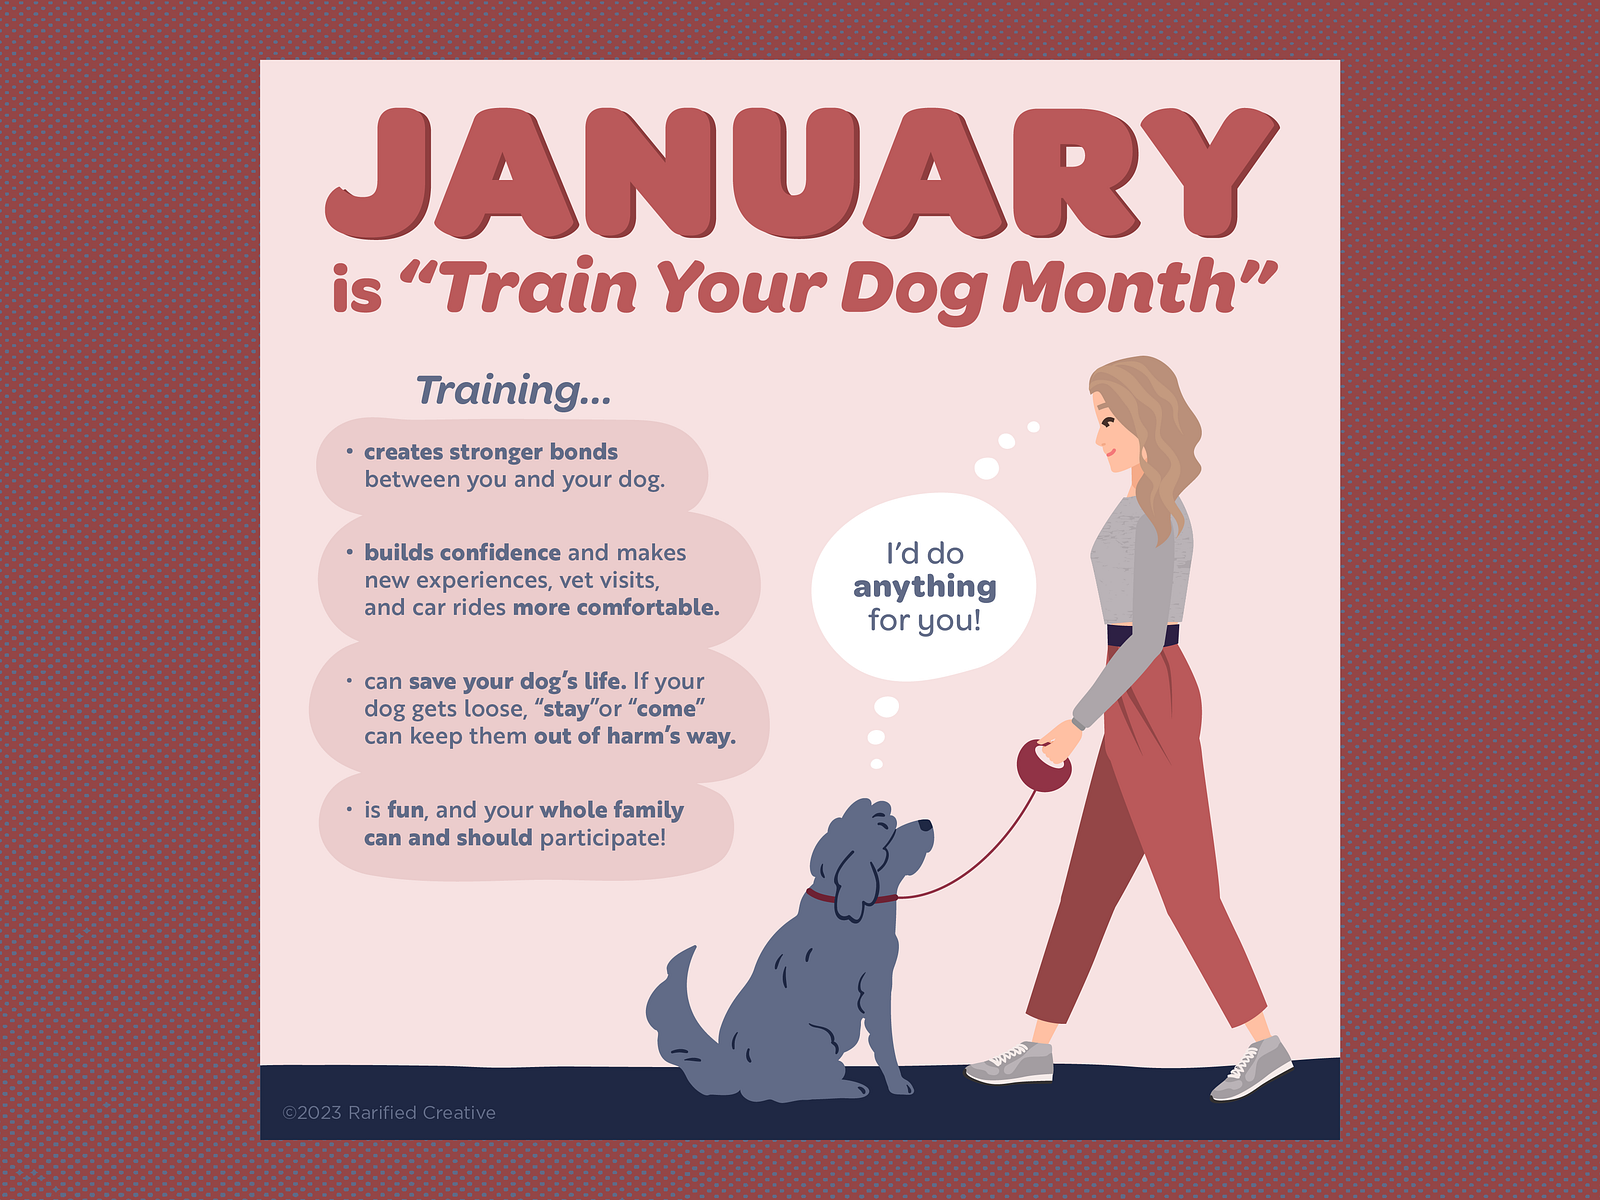 January is "Train Your Dog Month" infographic by Madeline on Dribbble